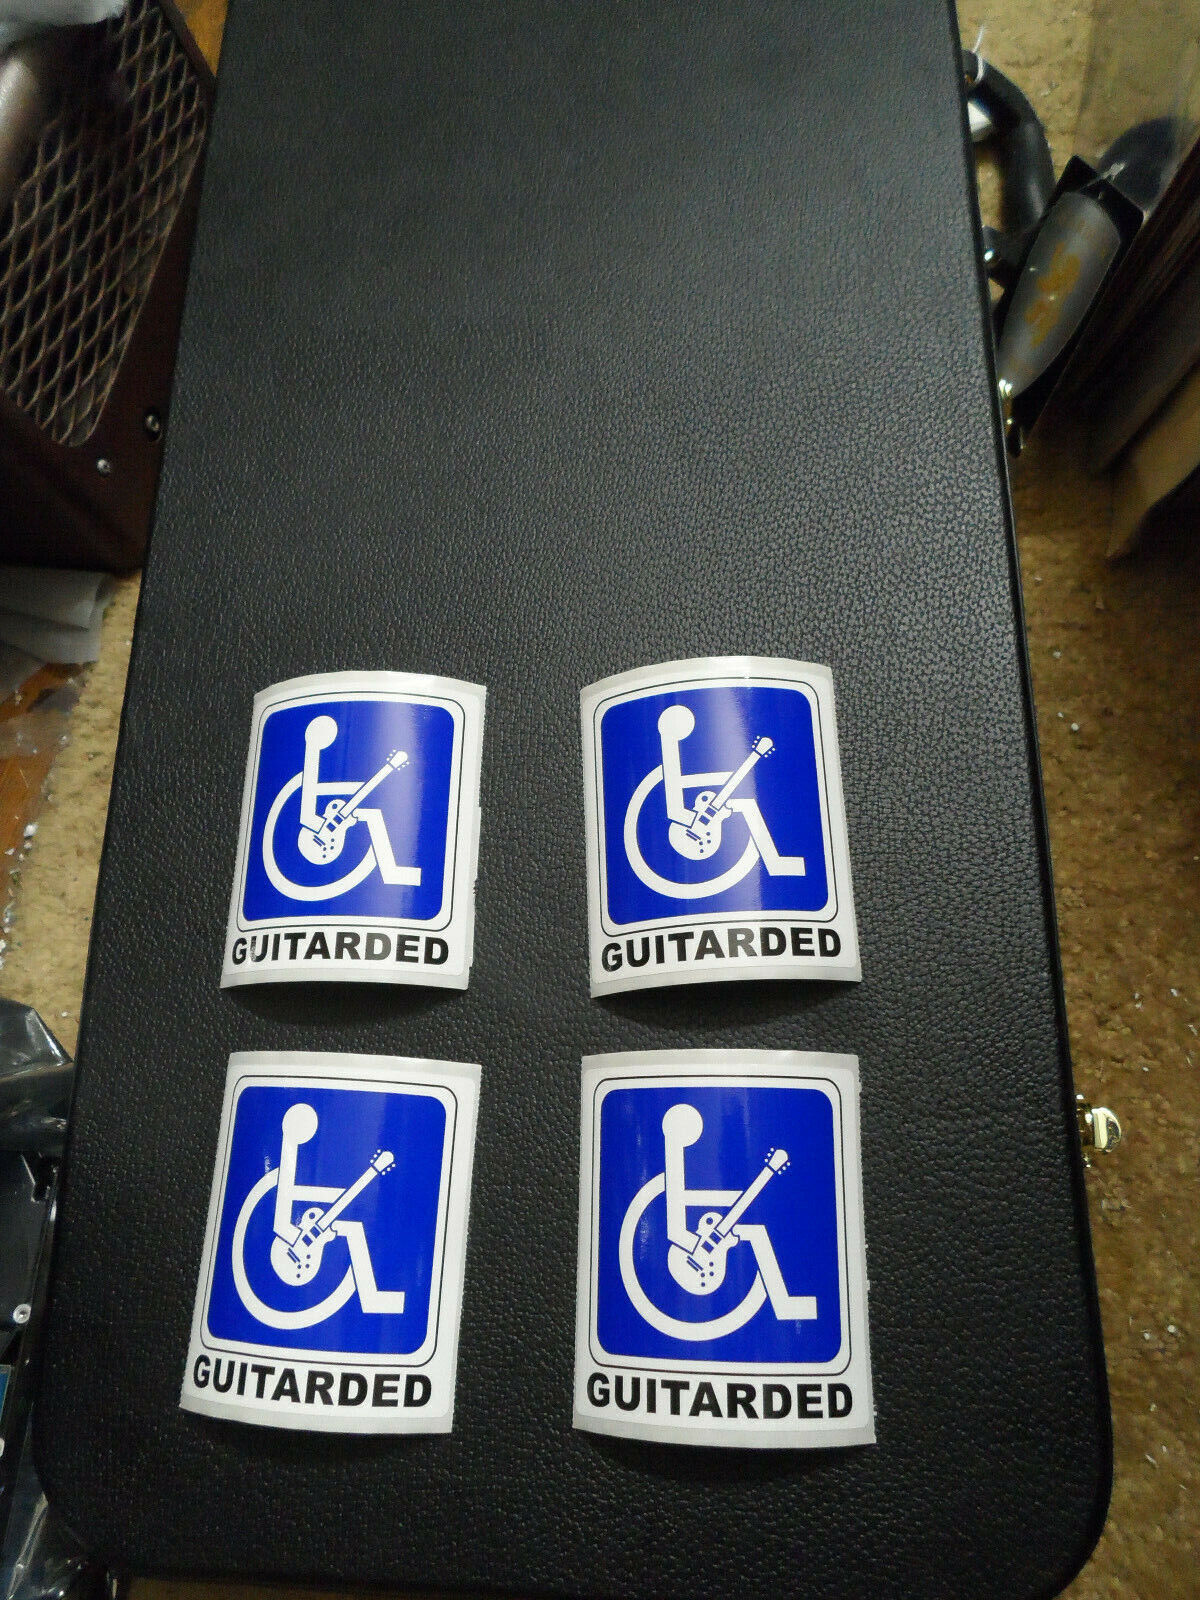 4 - NEW Guitar Case Guitarded Stickers